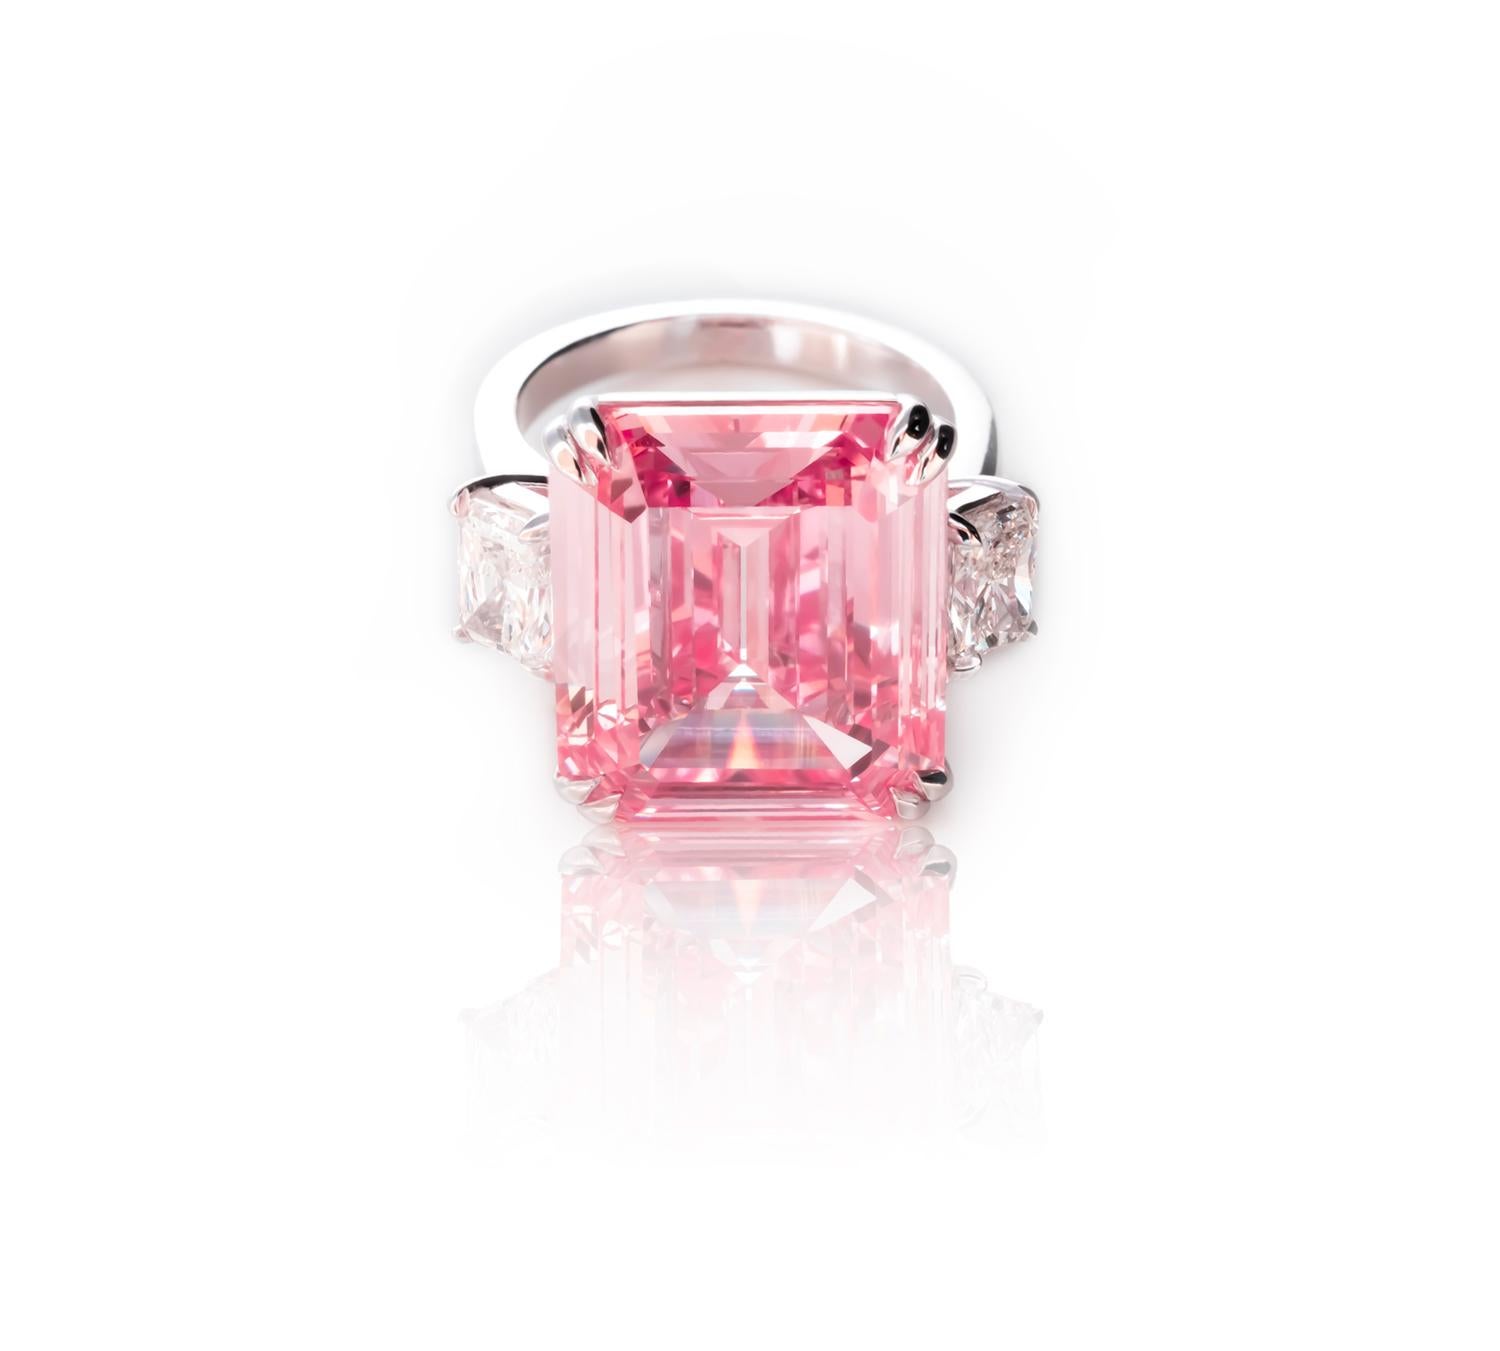 This unparalleled ring showcasing a stunning Emerald Cut 12-carat pink diamond with desirable bubble gum shades is an absolute rarity. The pink diamond is embraced by sparkling radiant-cut white diamonds on either side, creating a contrast that